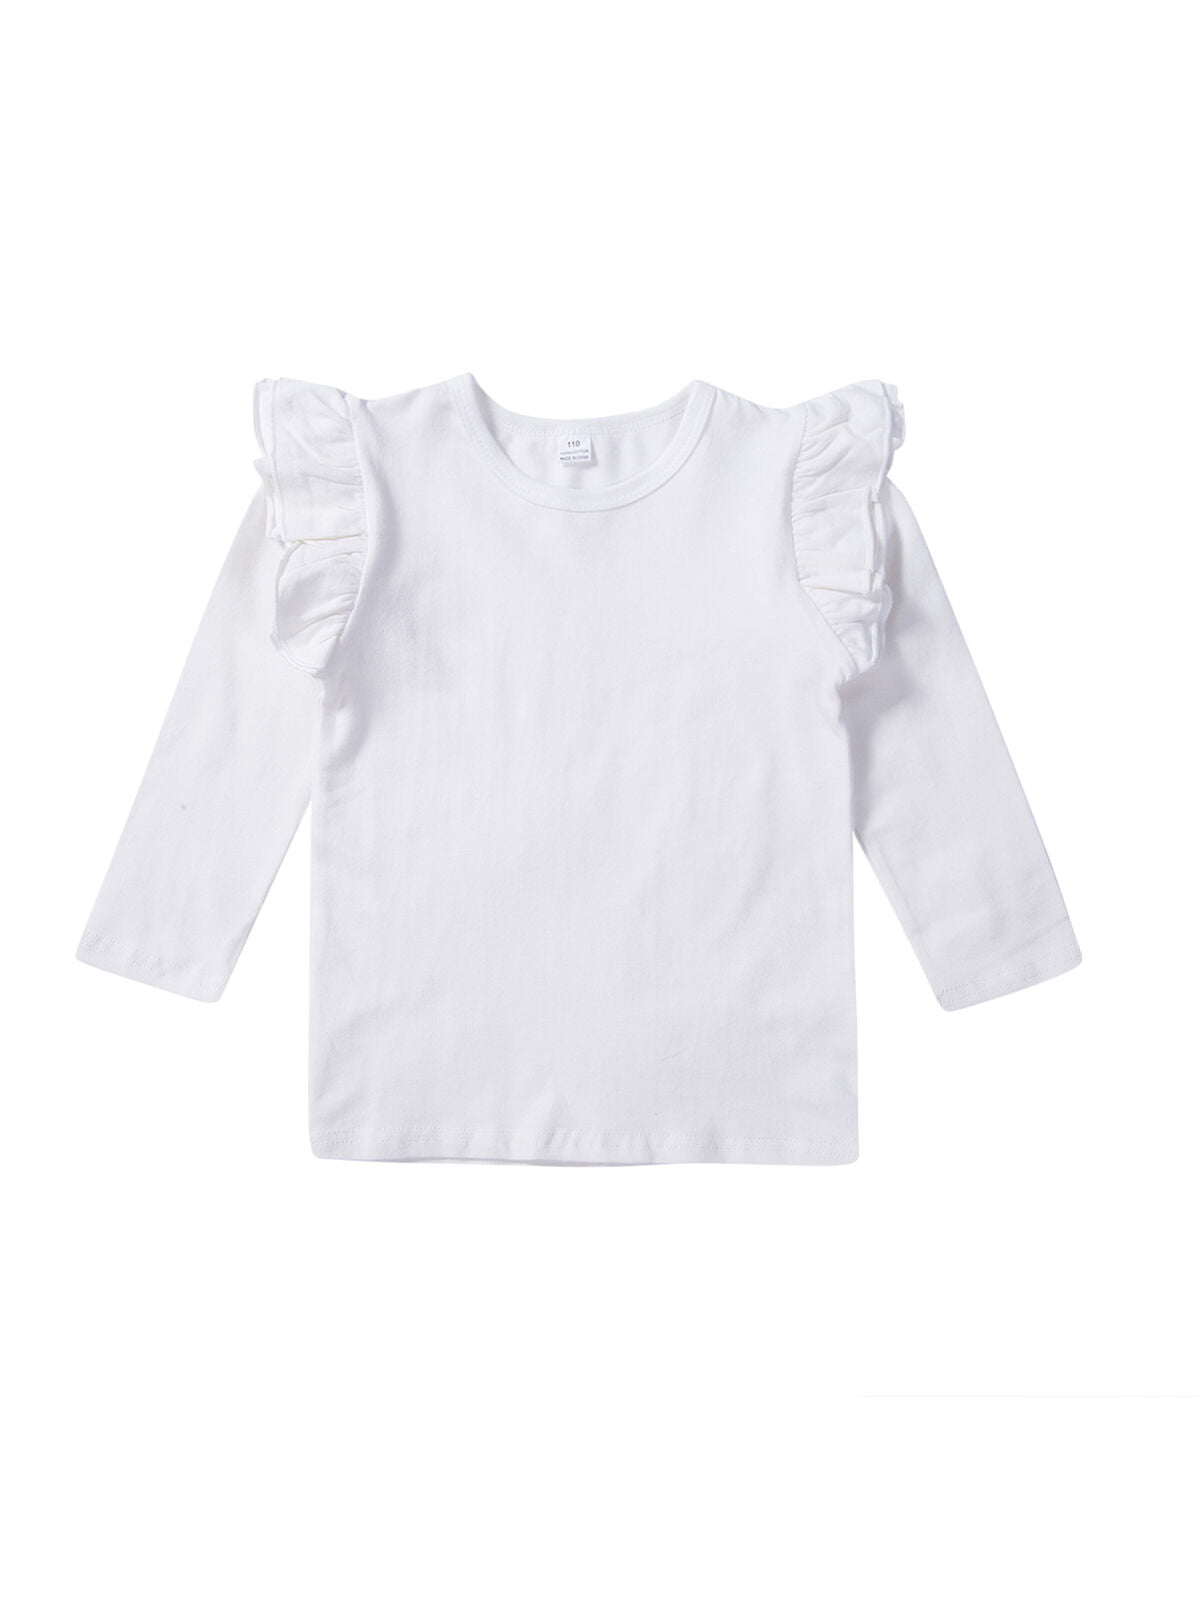 Toddler Kids Baby Girl Long Sleeve Knit Blouse Ruffled Shoulder T-Shirt Top with Adjustable Straps